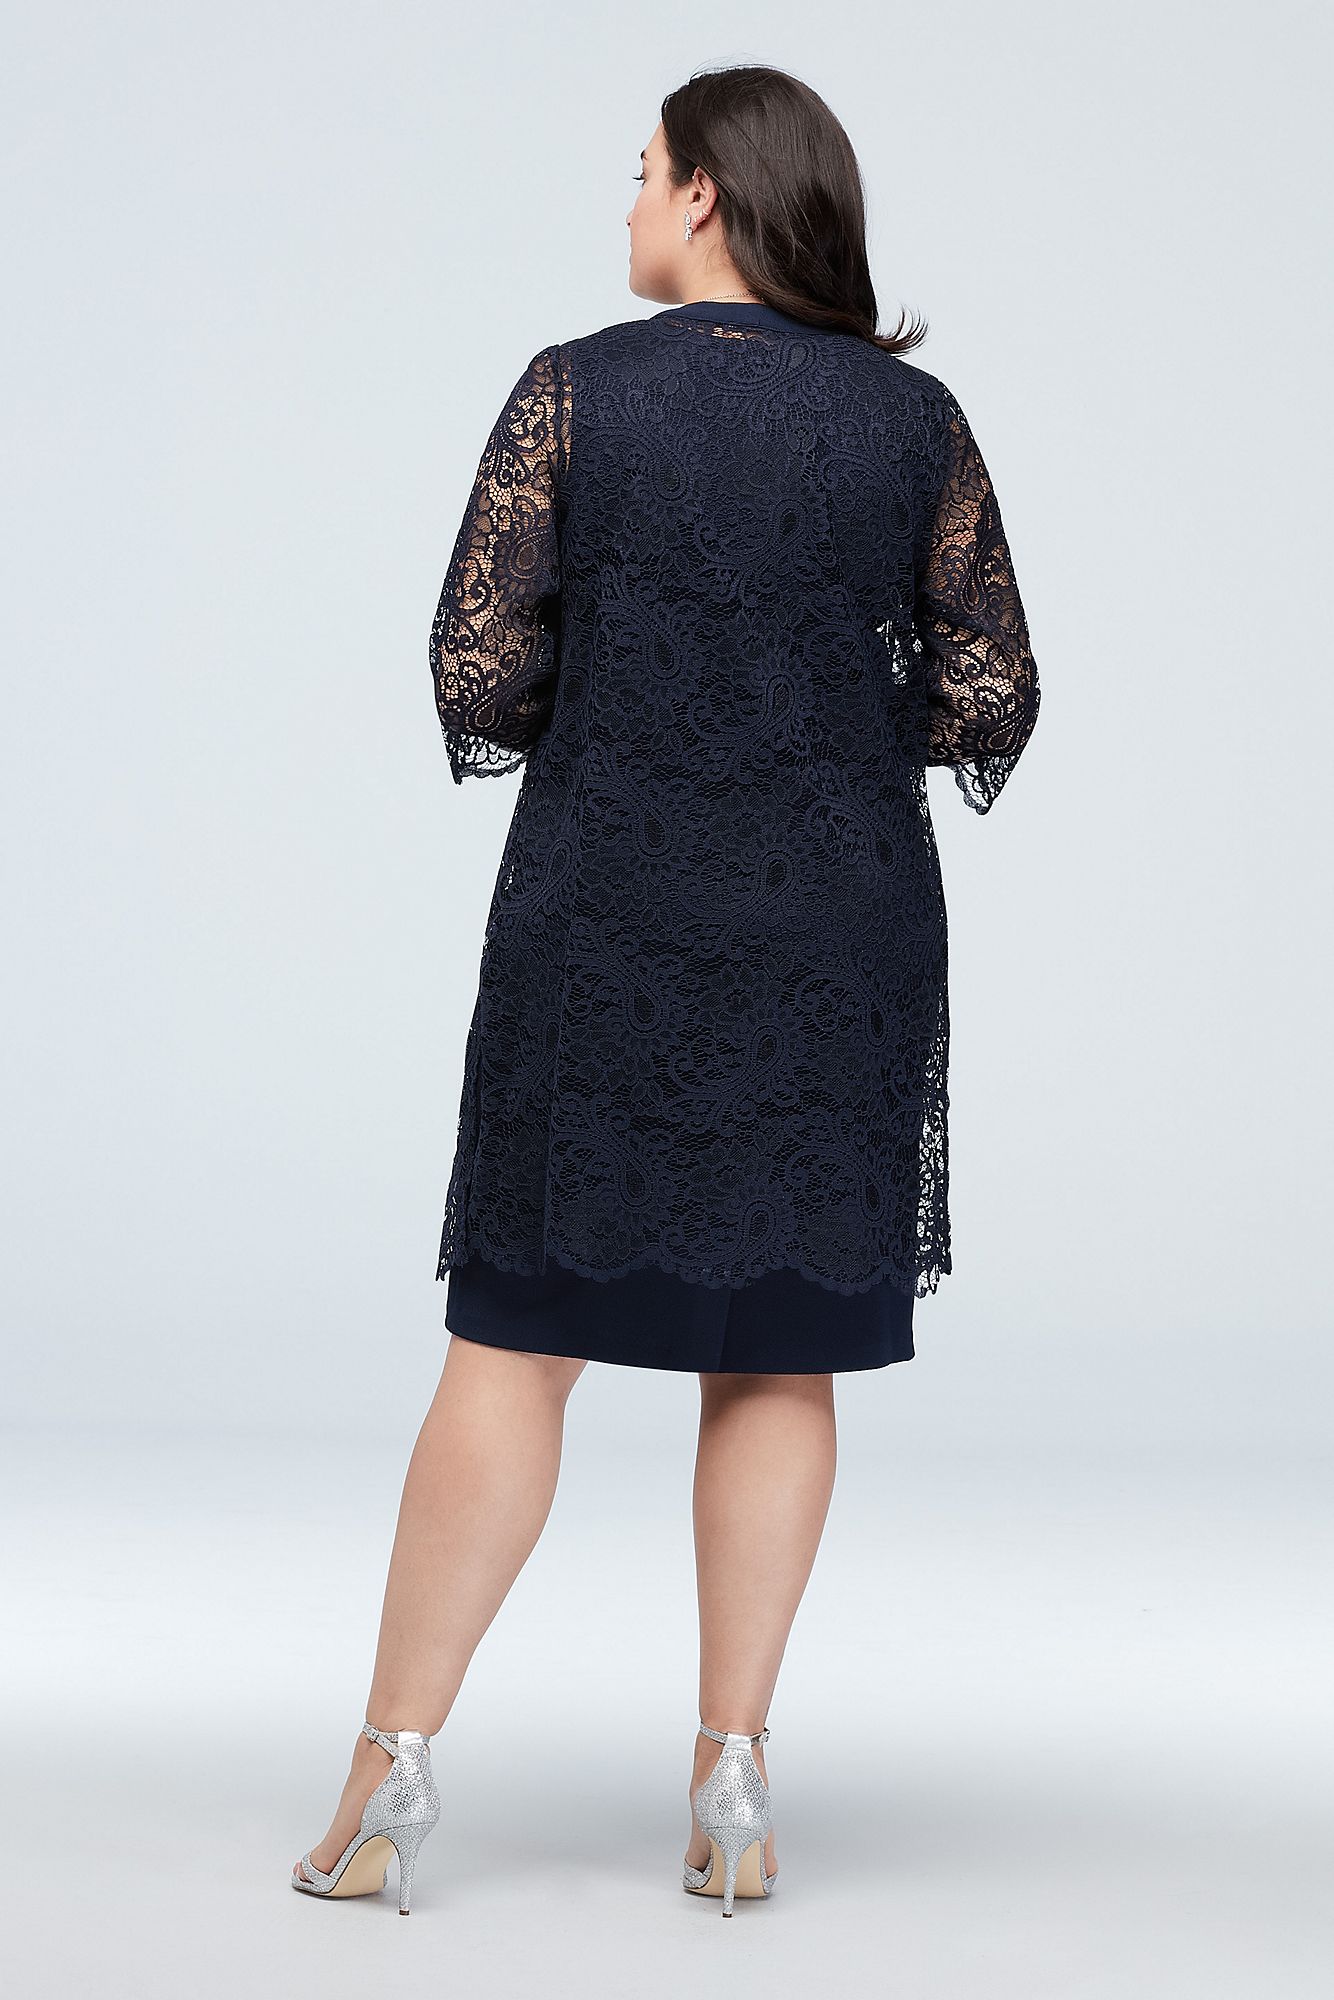 Above Knee Beaded V-neck Dress with Lace Jacket Style 27805